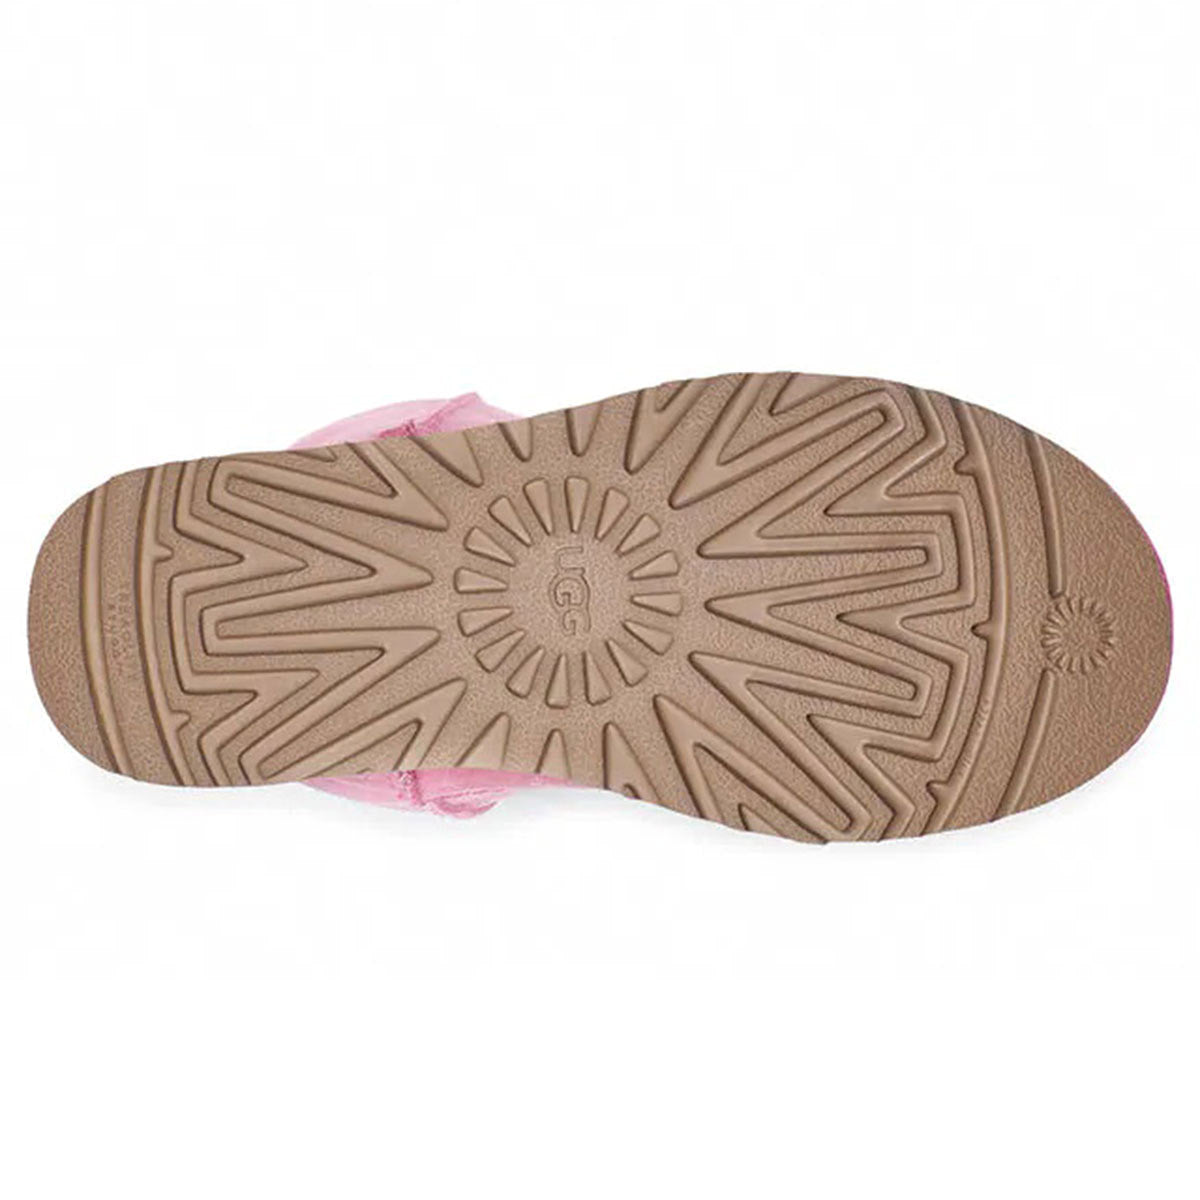 Sole of a shoe with a Treadlite by UGG patterned tread design on the UGG CLASSIC SHORT II WILD BERRY - WOMENS.